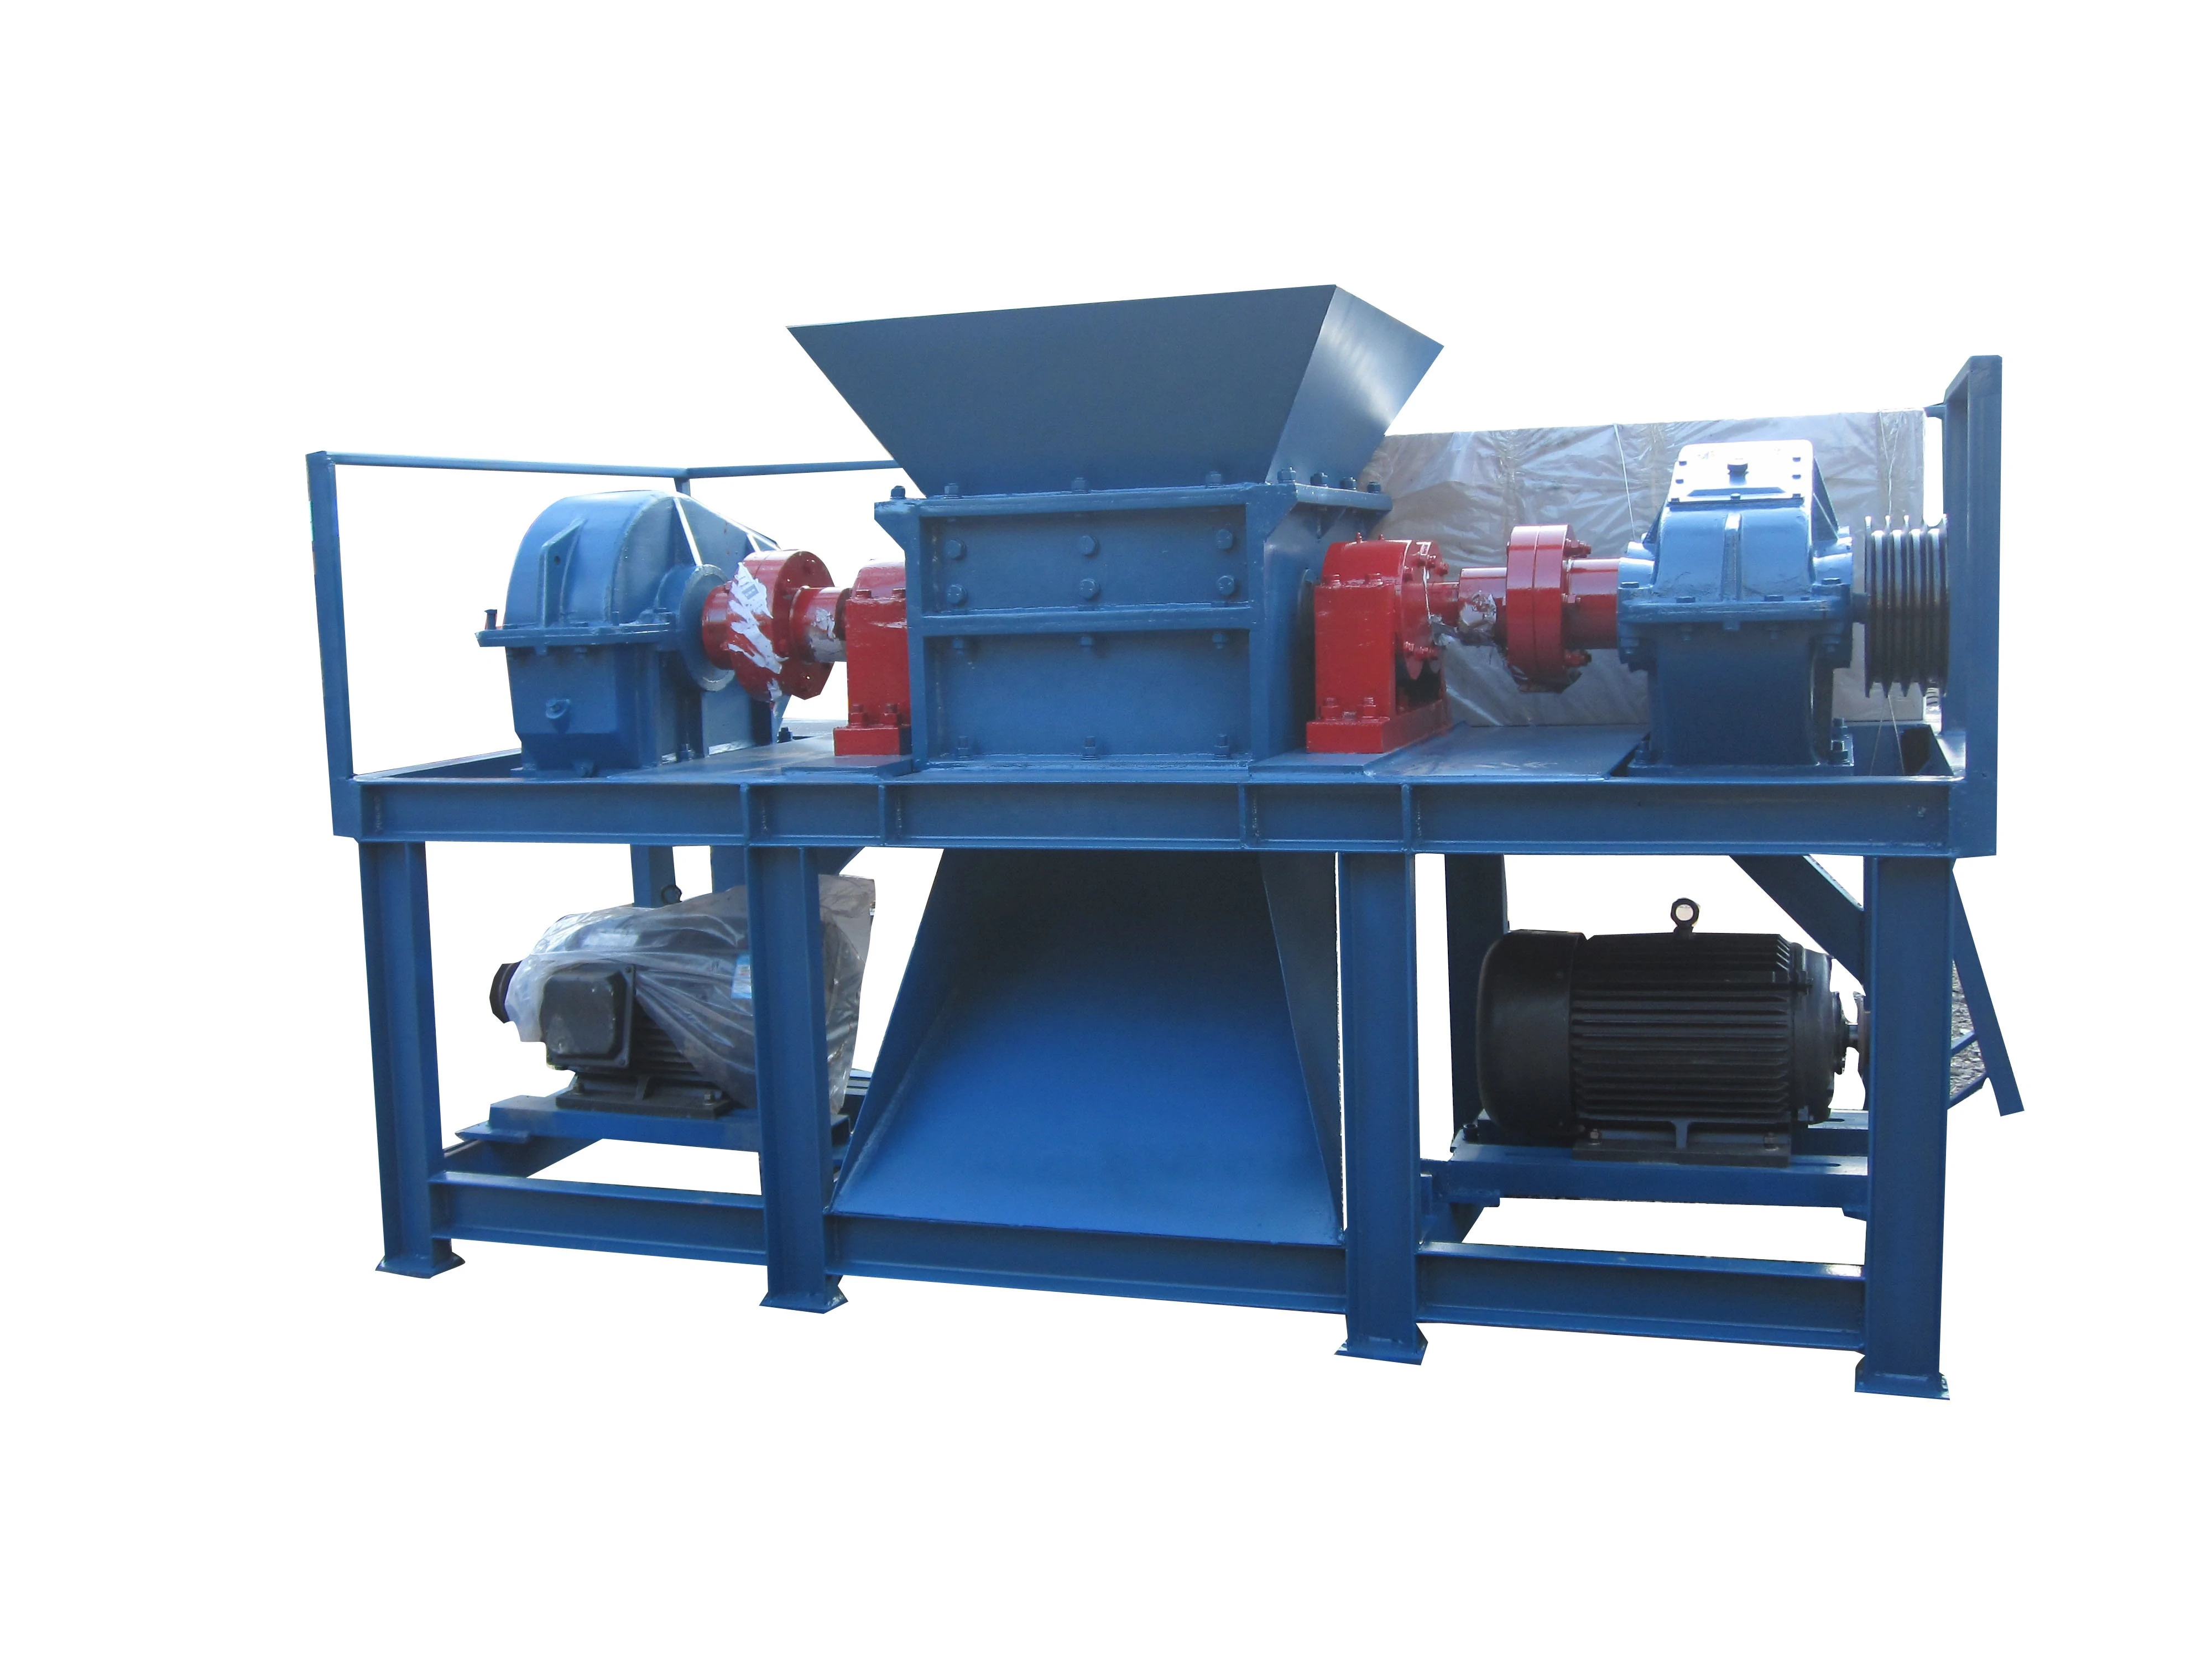 Industrial Tire Tyre Shredder Plastic Recycling Machine